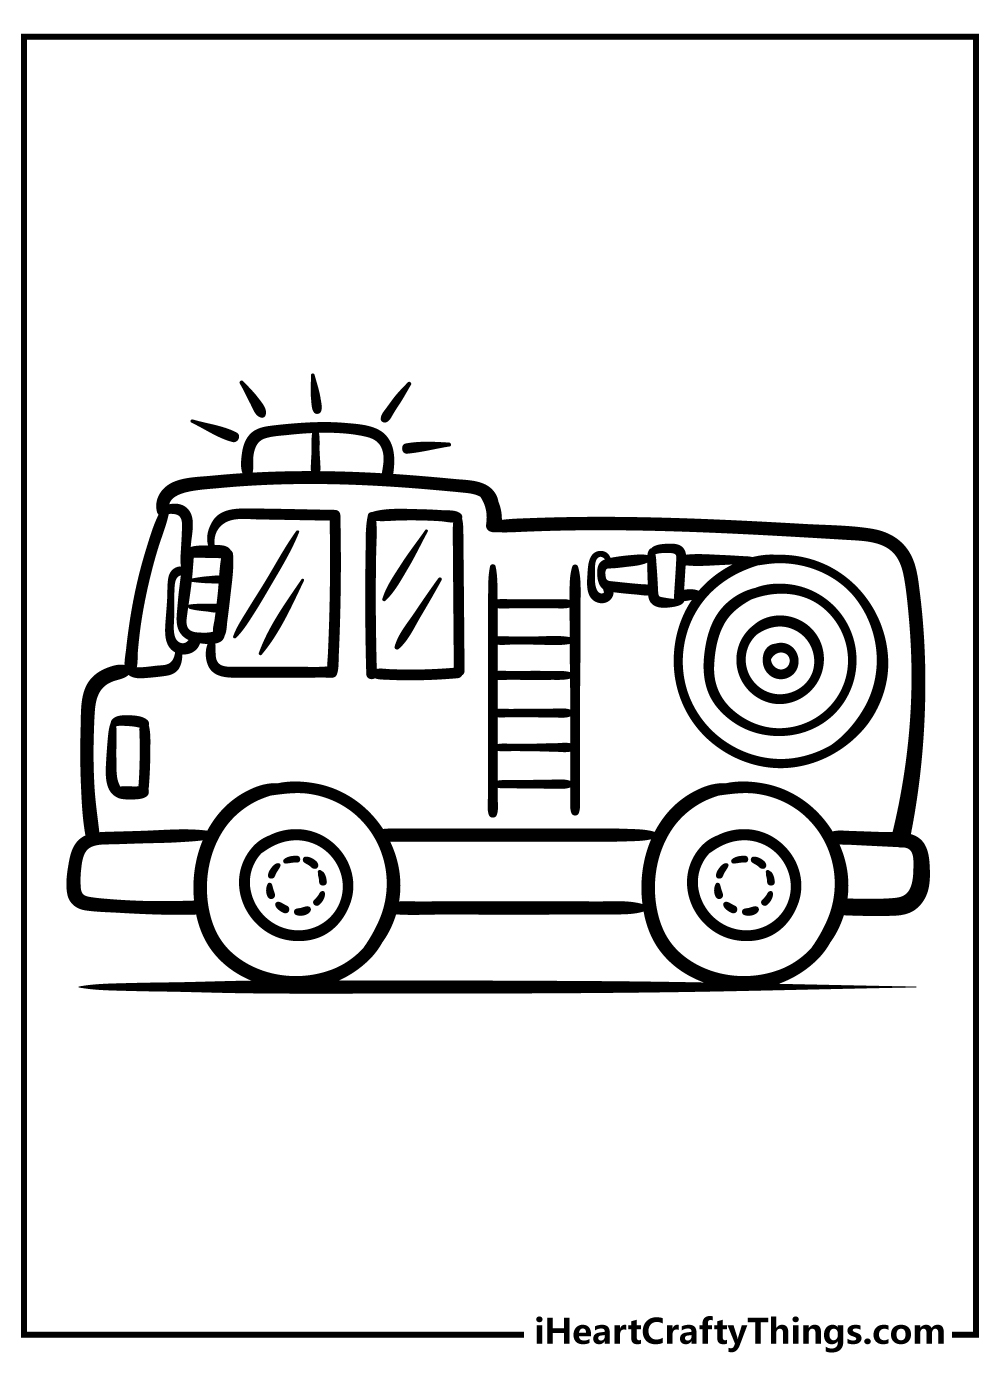 Printable Fire Truck Coloring Pages Updated 20